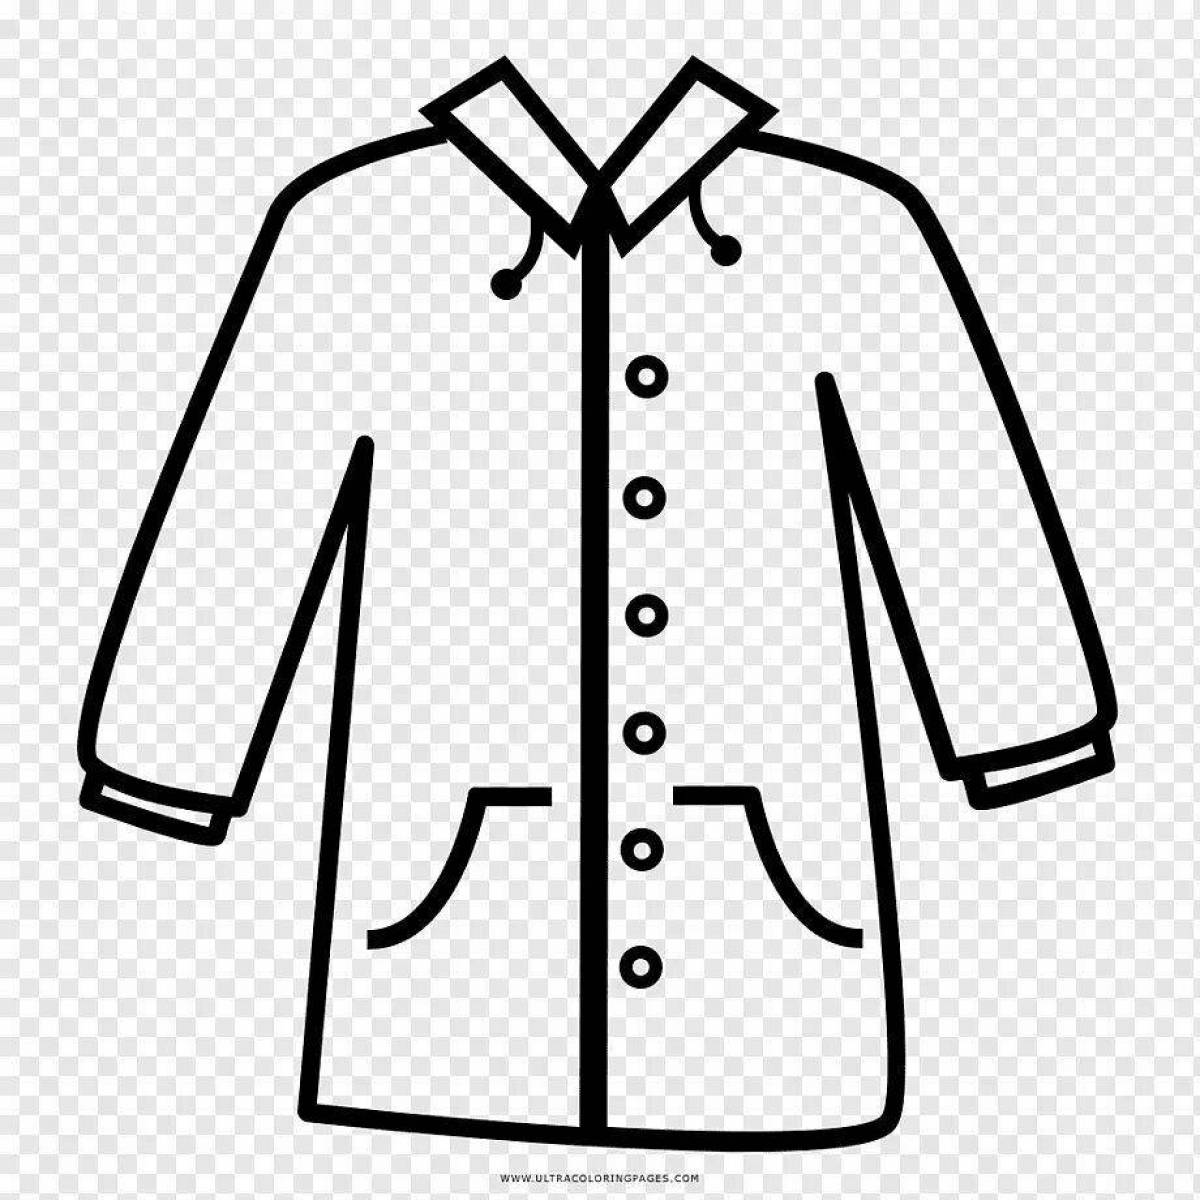 Coloring page stylish coat for kids